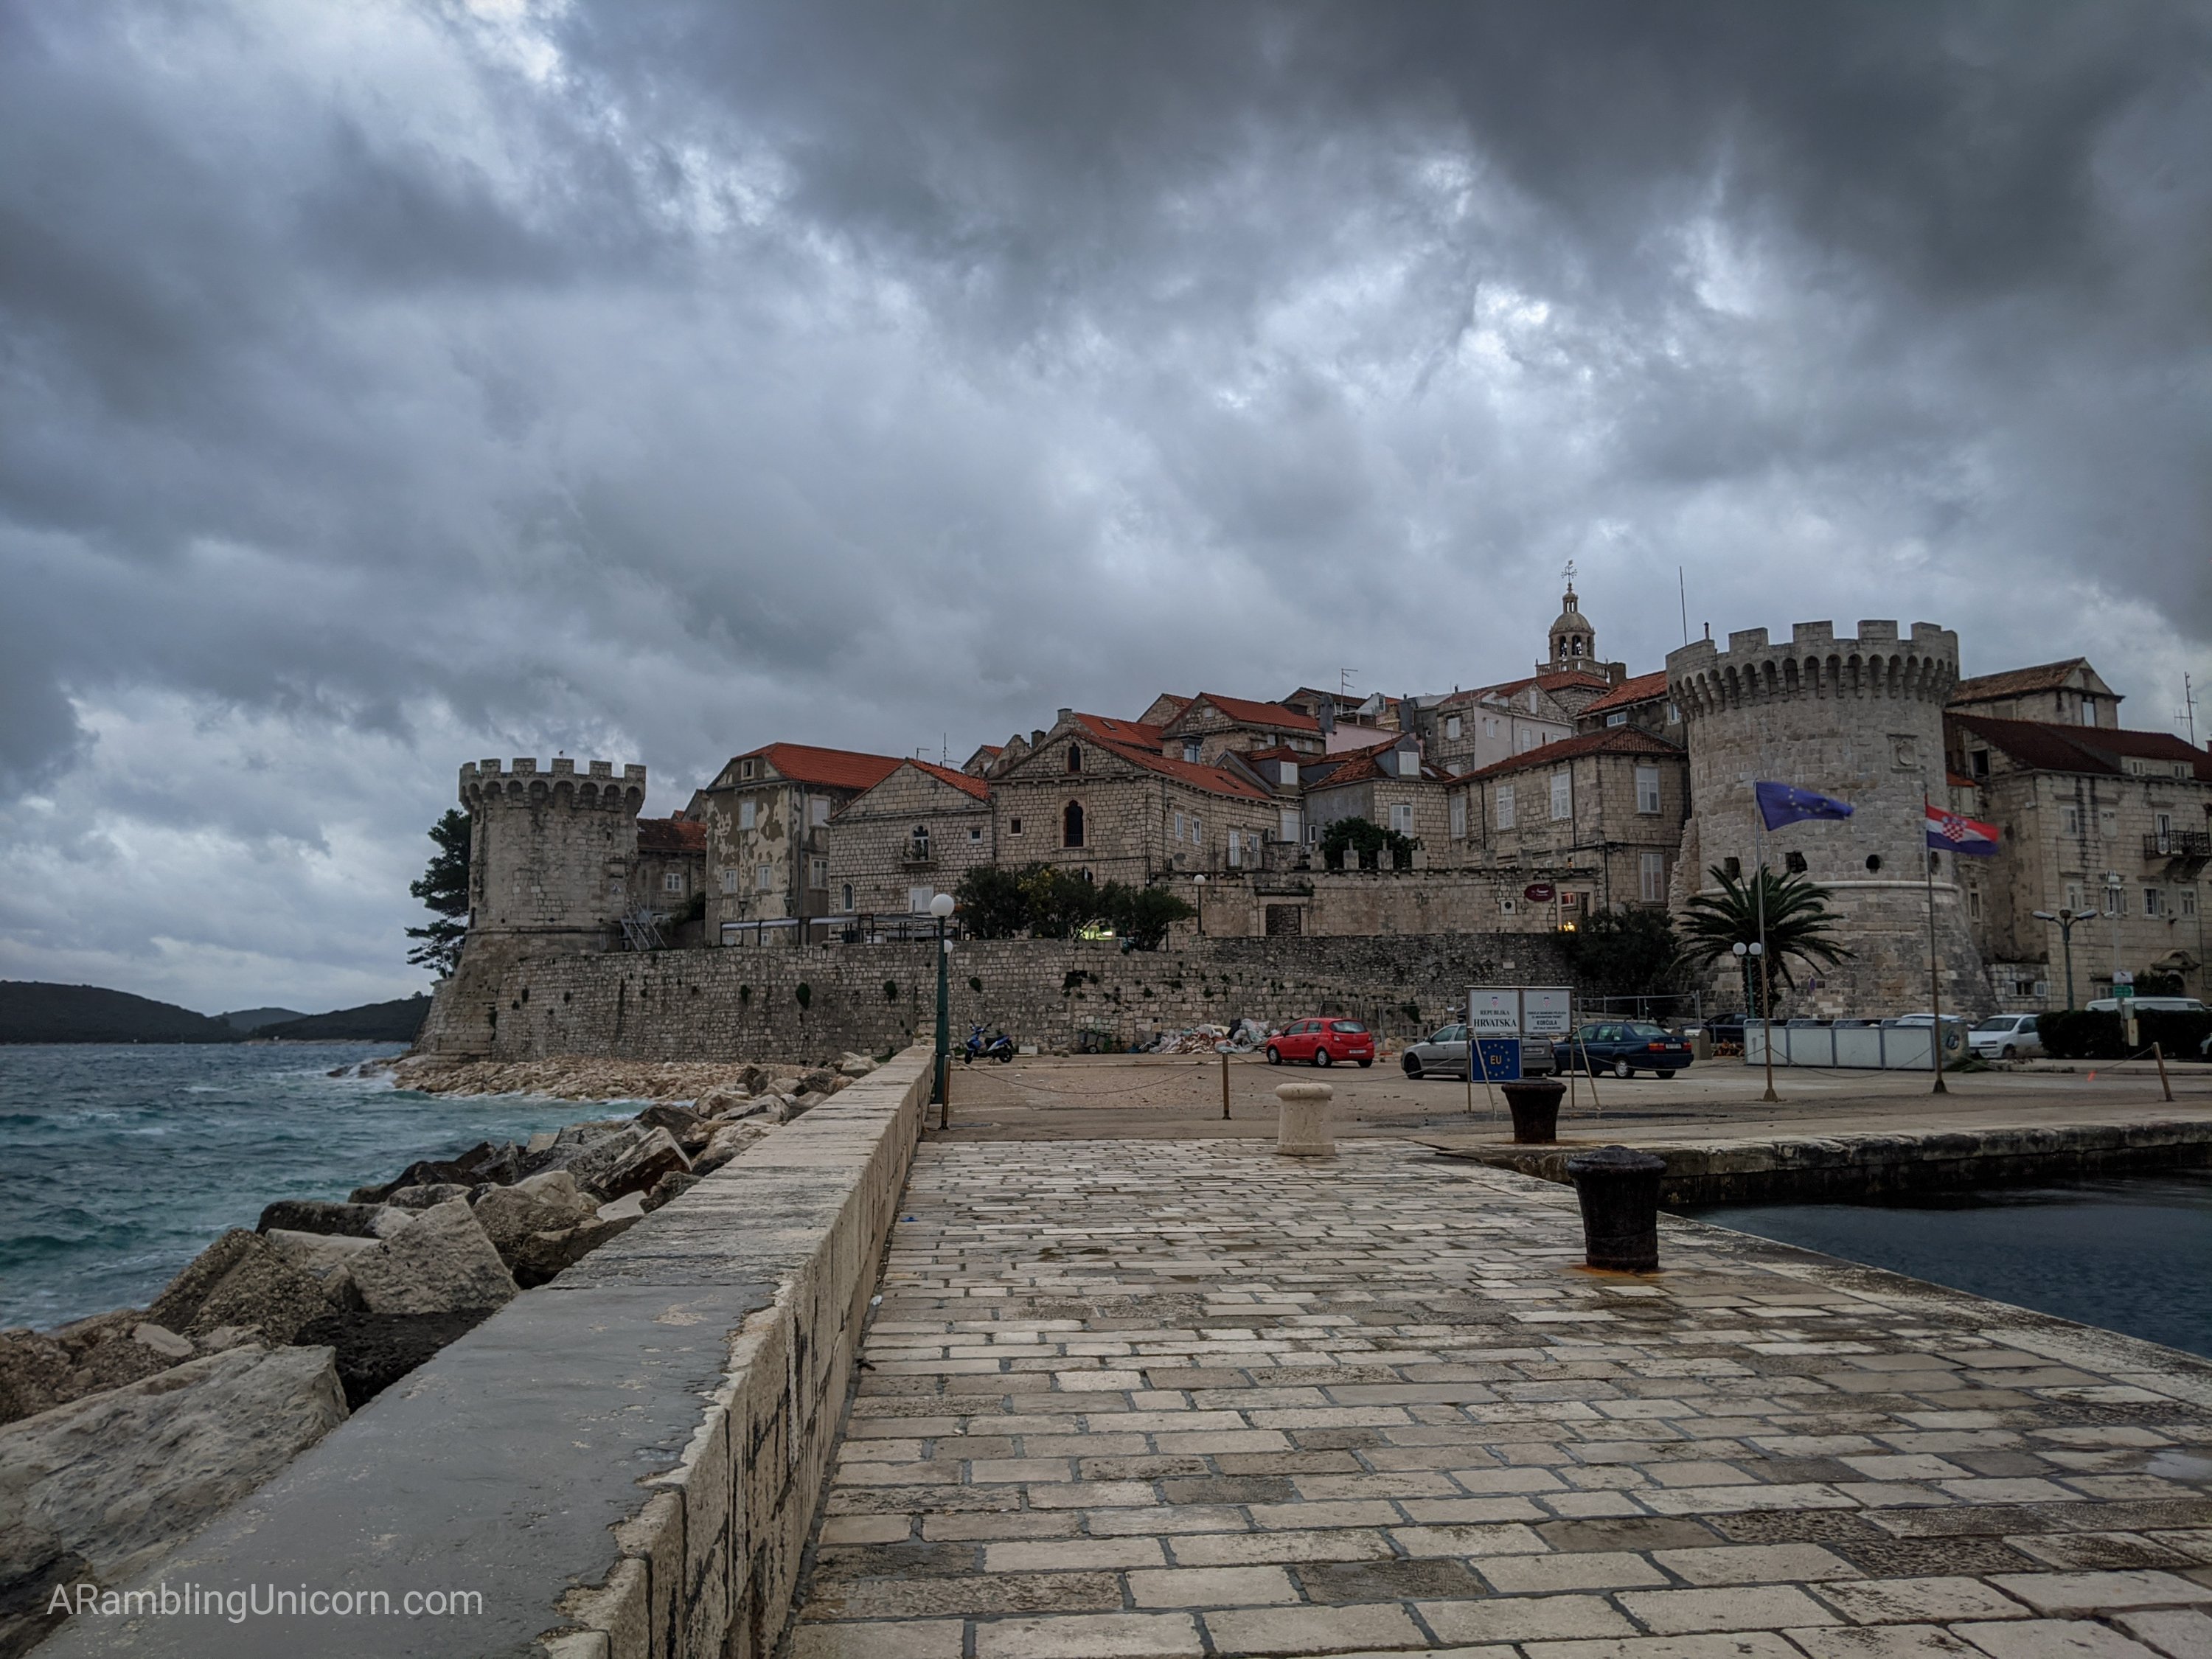 Korčula in the off season: A quiet town with imposing fortified walls